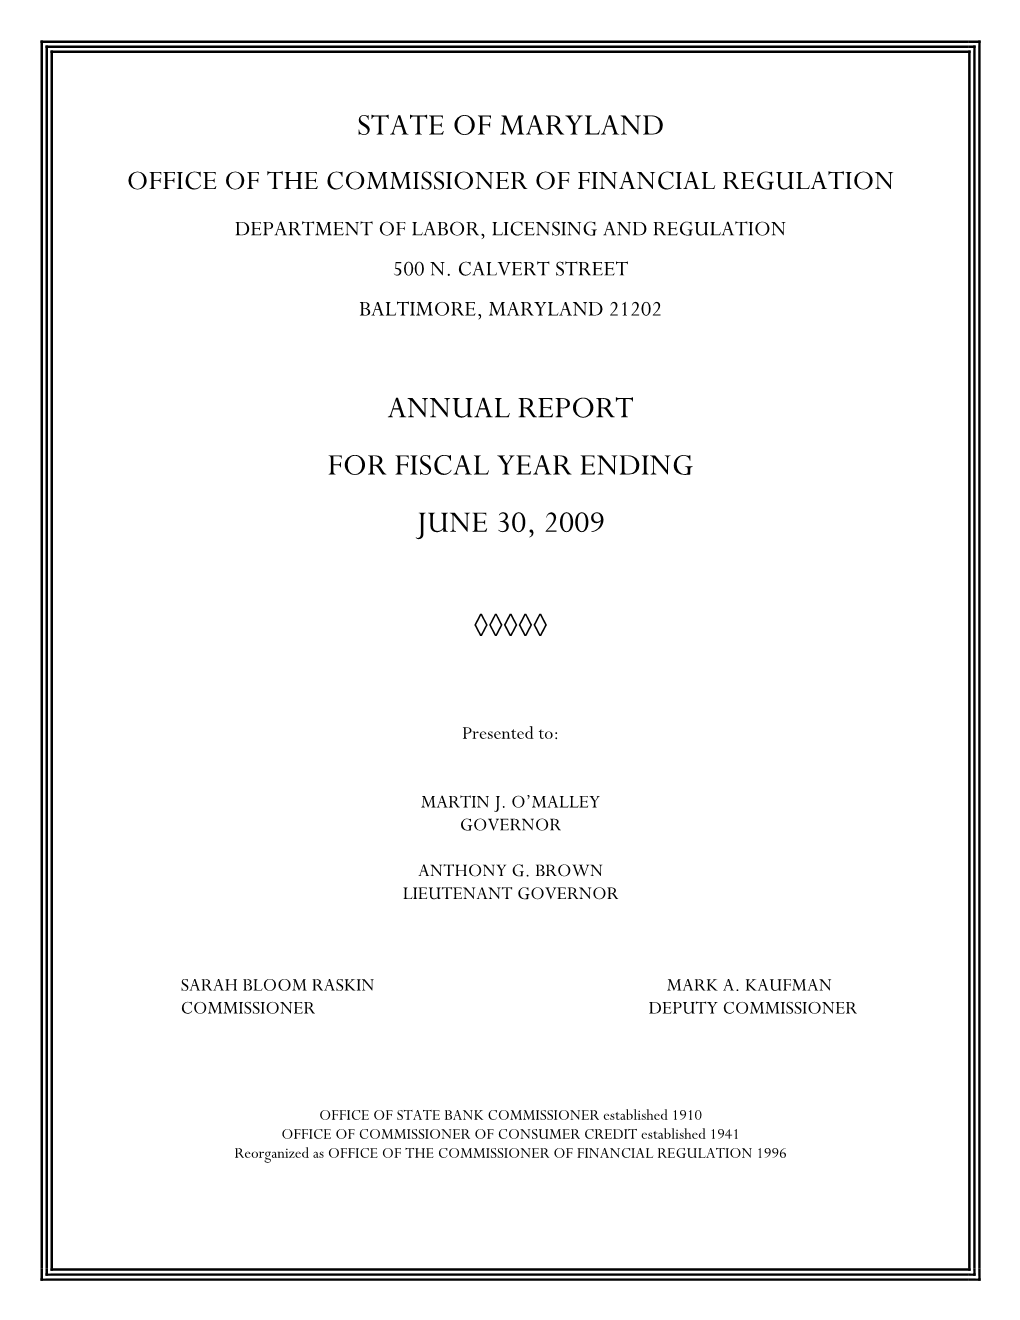 Office of the Commissioner of Financial Regulation Department of Labor, Licensing and Regulation 500 N